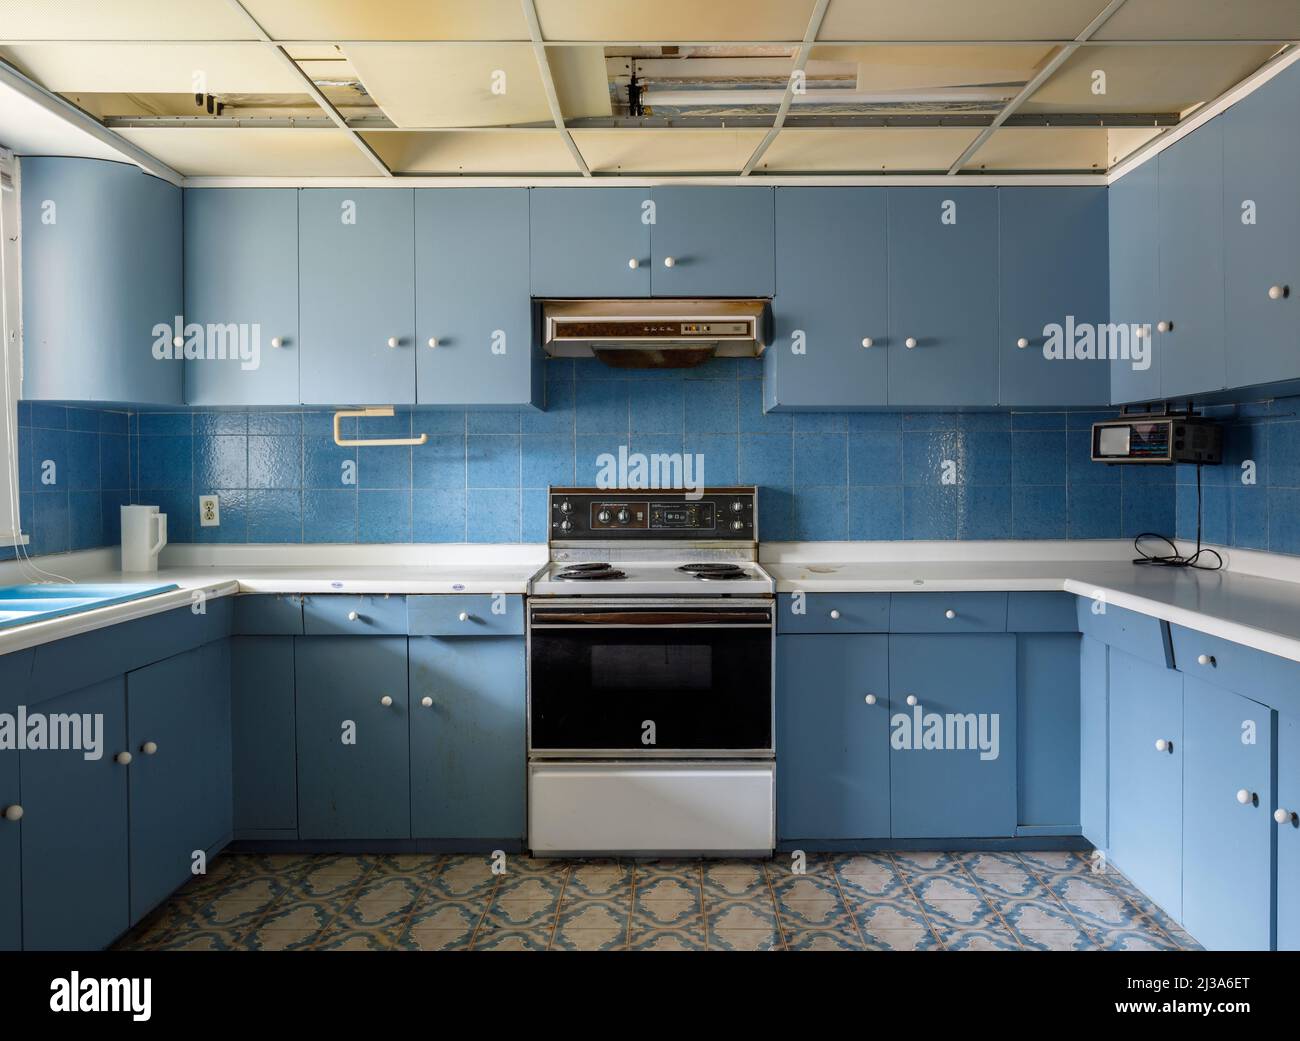 A retro kitchen inside an abandoned house. This house has since been demolished. Stock Photo